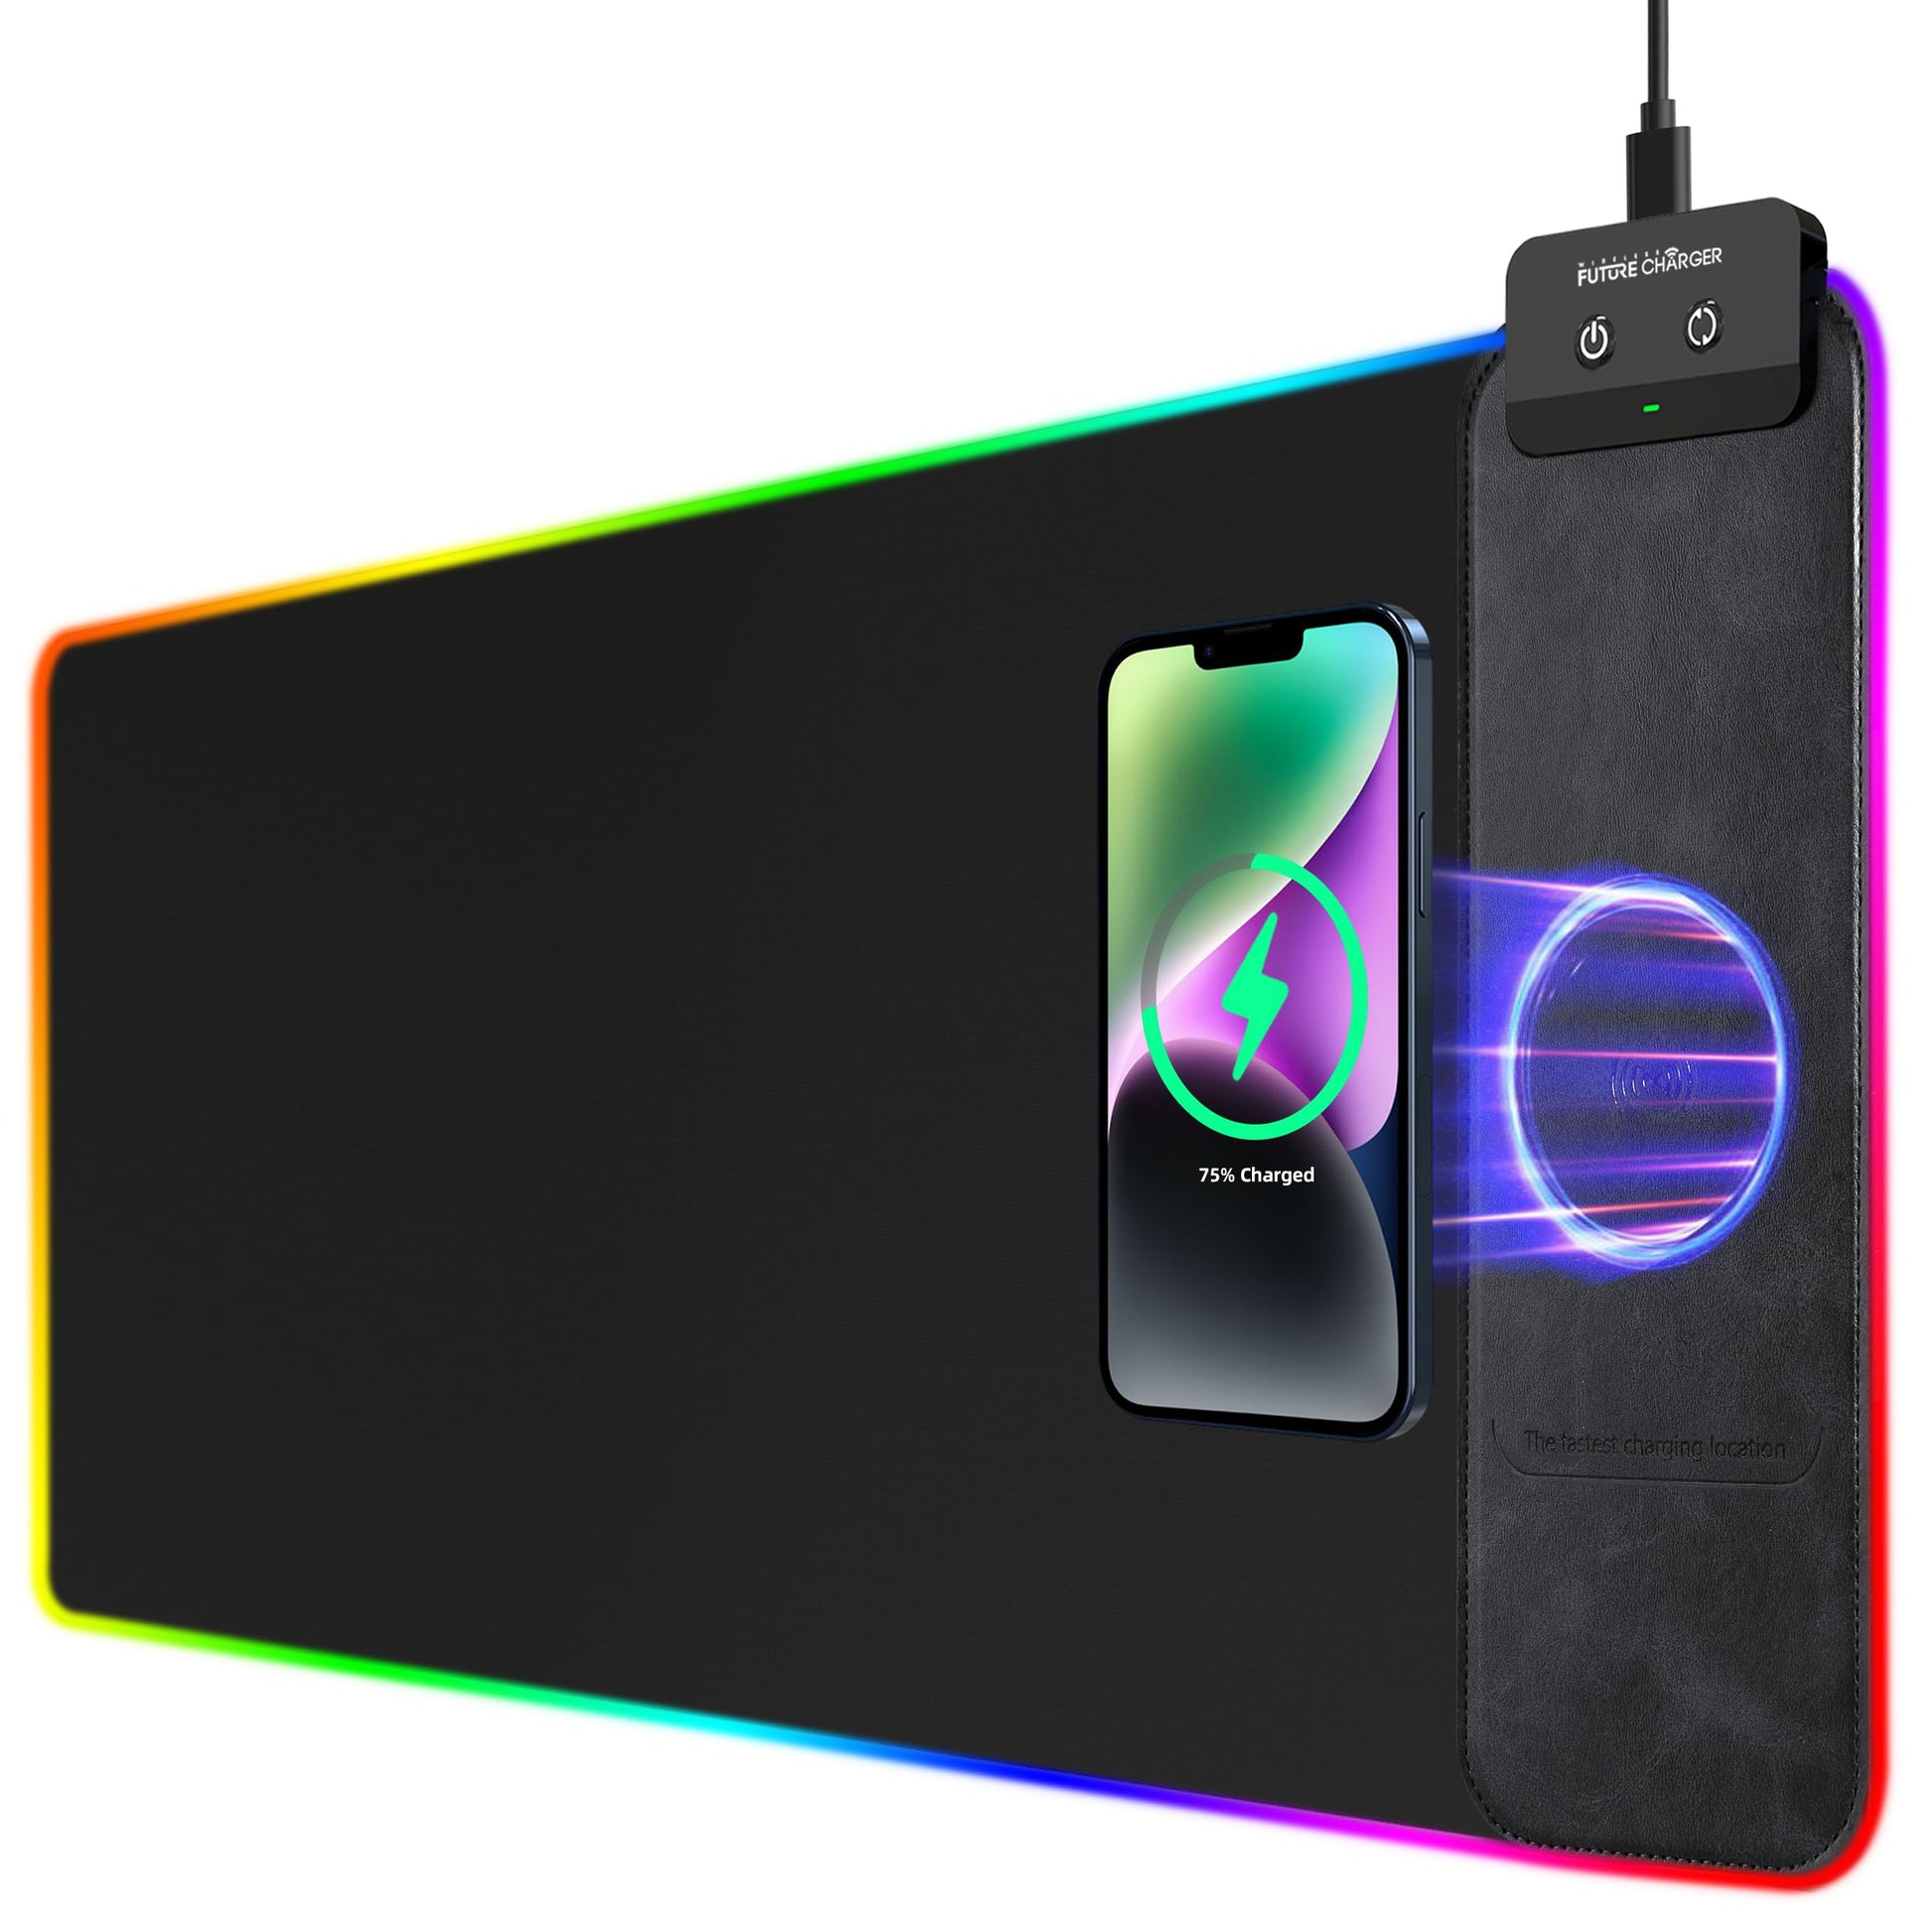 RGB Gaming Mouse Pad with Wireless Charging 10W - 31.5"x11.8" X-Large Desk Mat for Laptop/PC/Keyboard, 9 Light Modes, Non-Slip Rubber Base, Waterproof, Black - amzGamess